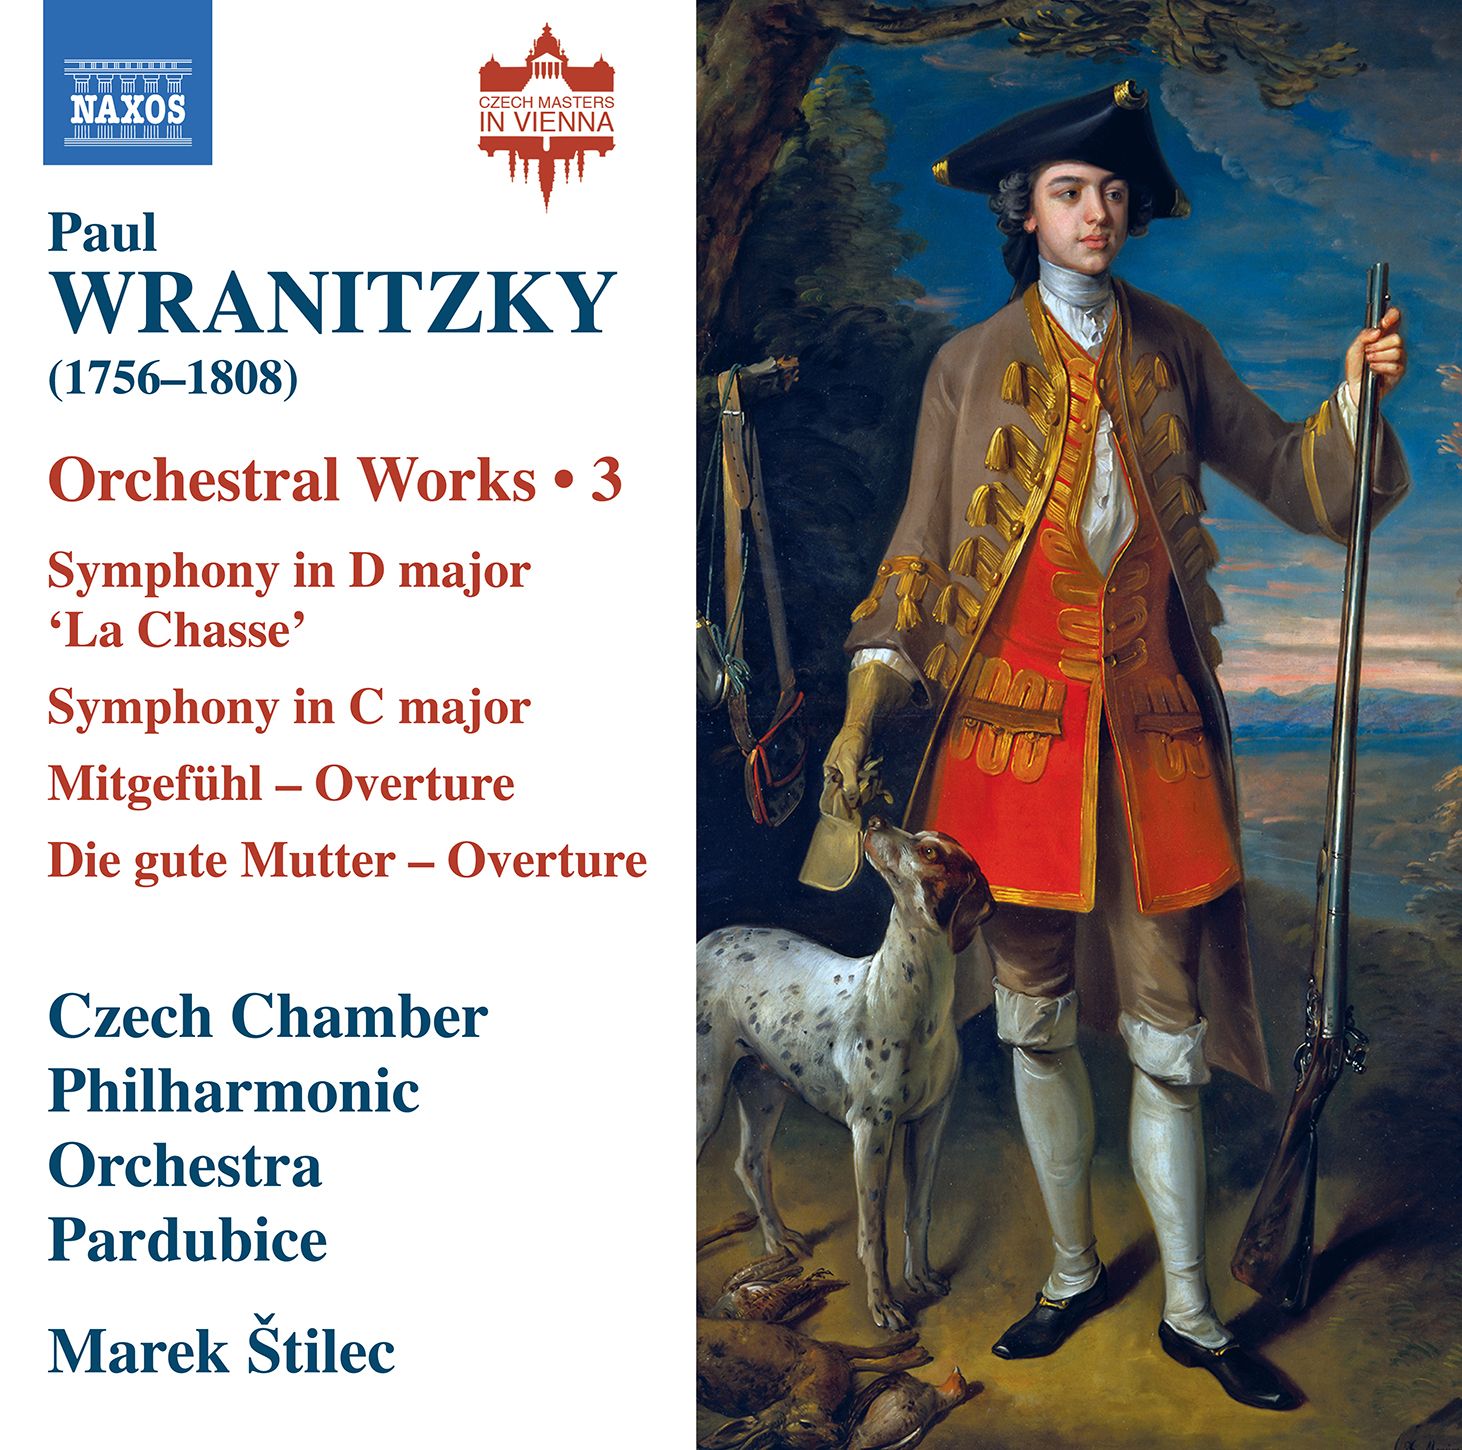 Naxos continues its Wranitzky series with more delights ...